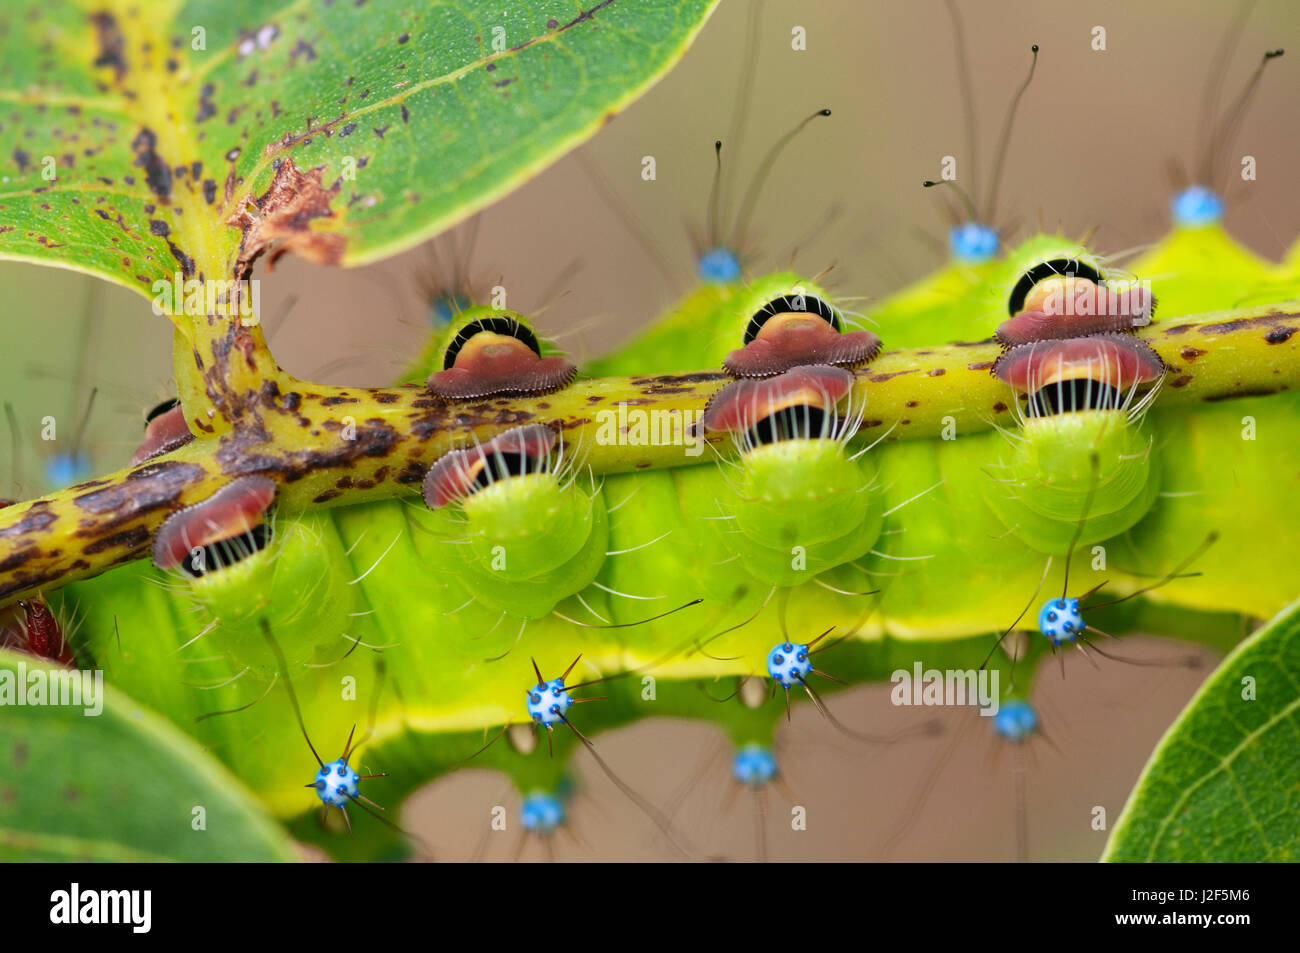 Giant Peacock Moth, detail of the feet of the caterpillar Stock Photo